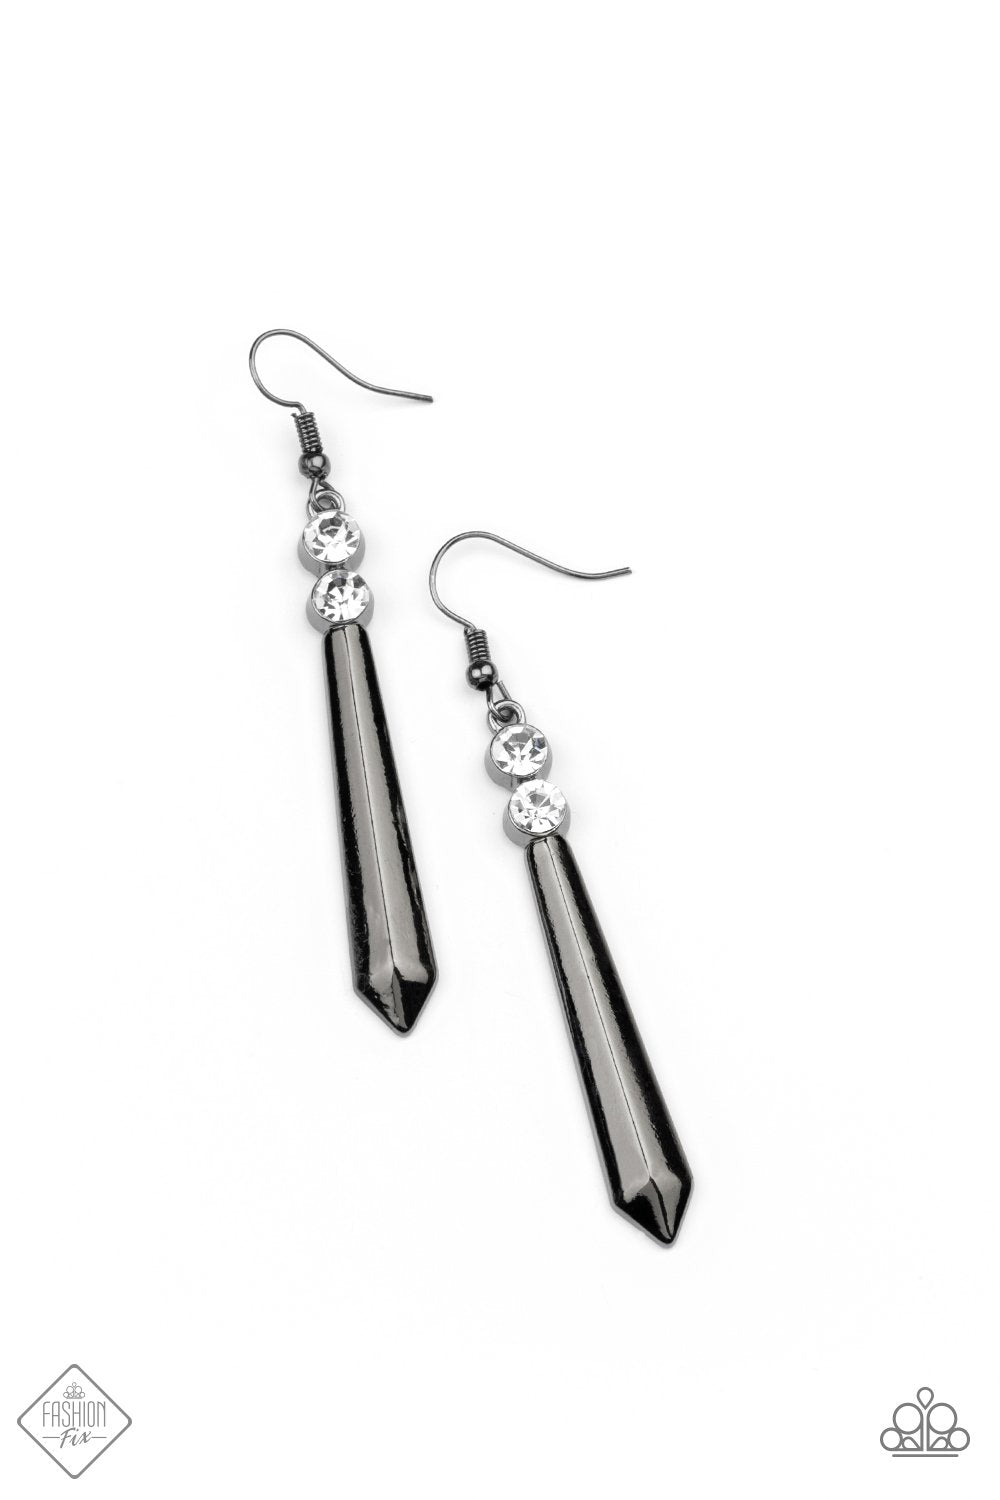 Paparazzi Sparkle Stream Black Fishhook Earrings - Fashion Fix Magnificent Musings May 2021